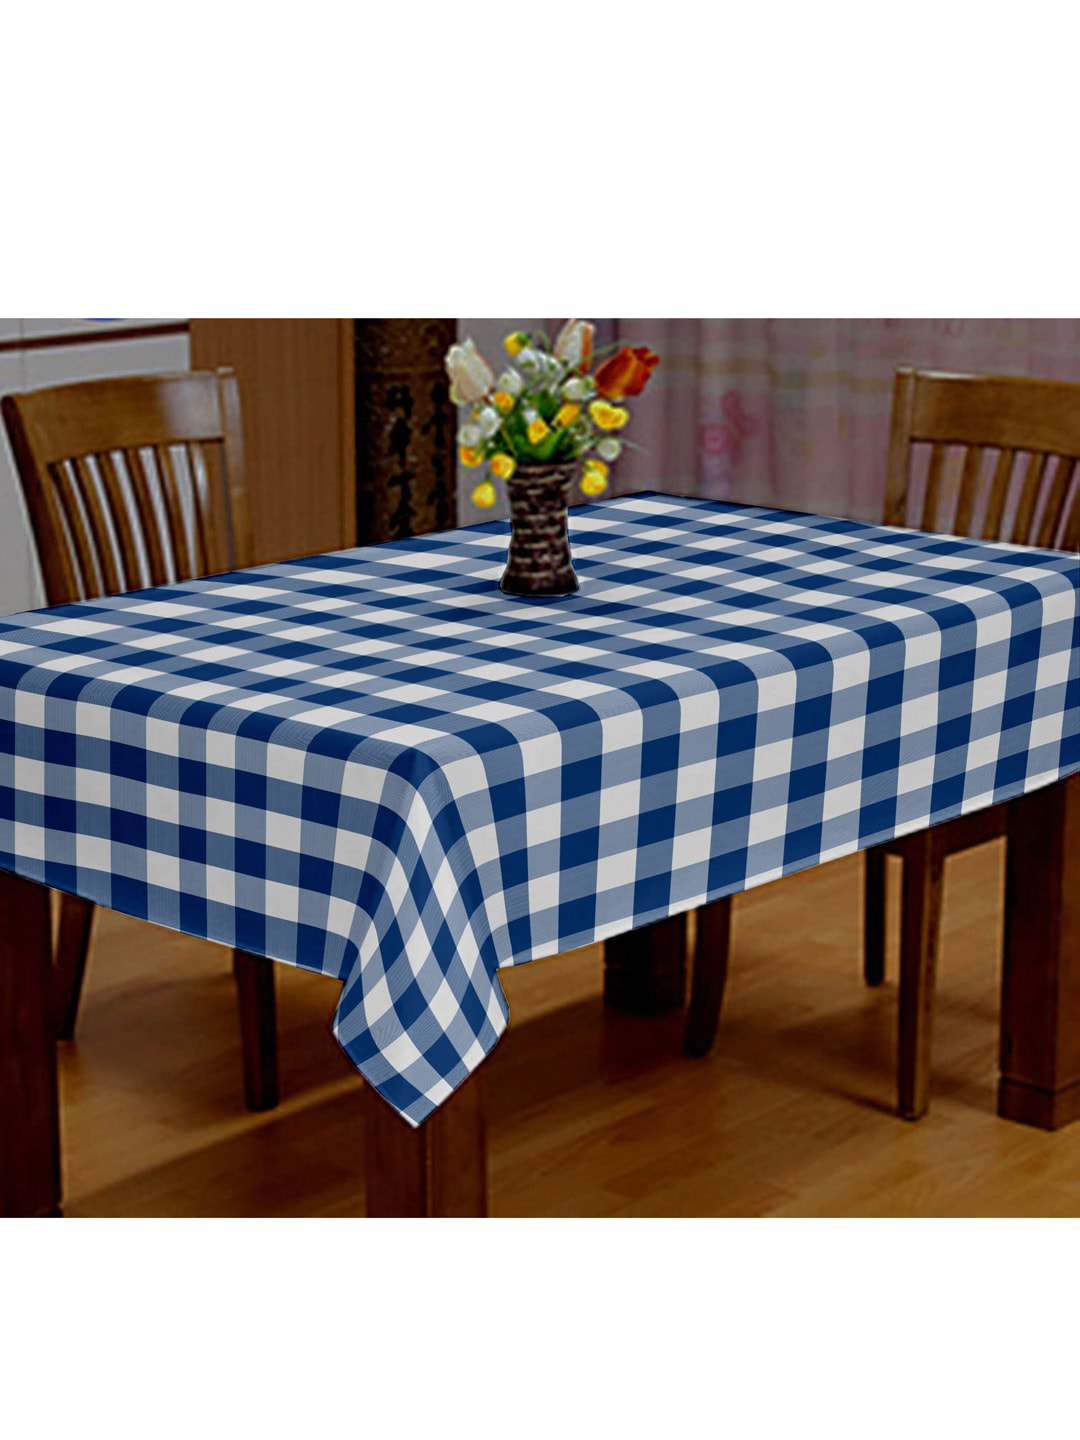 Lushomes Blue & White Checked 4-Seater Cotton Table Cover Price in India